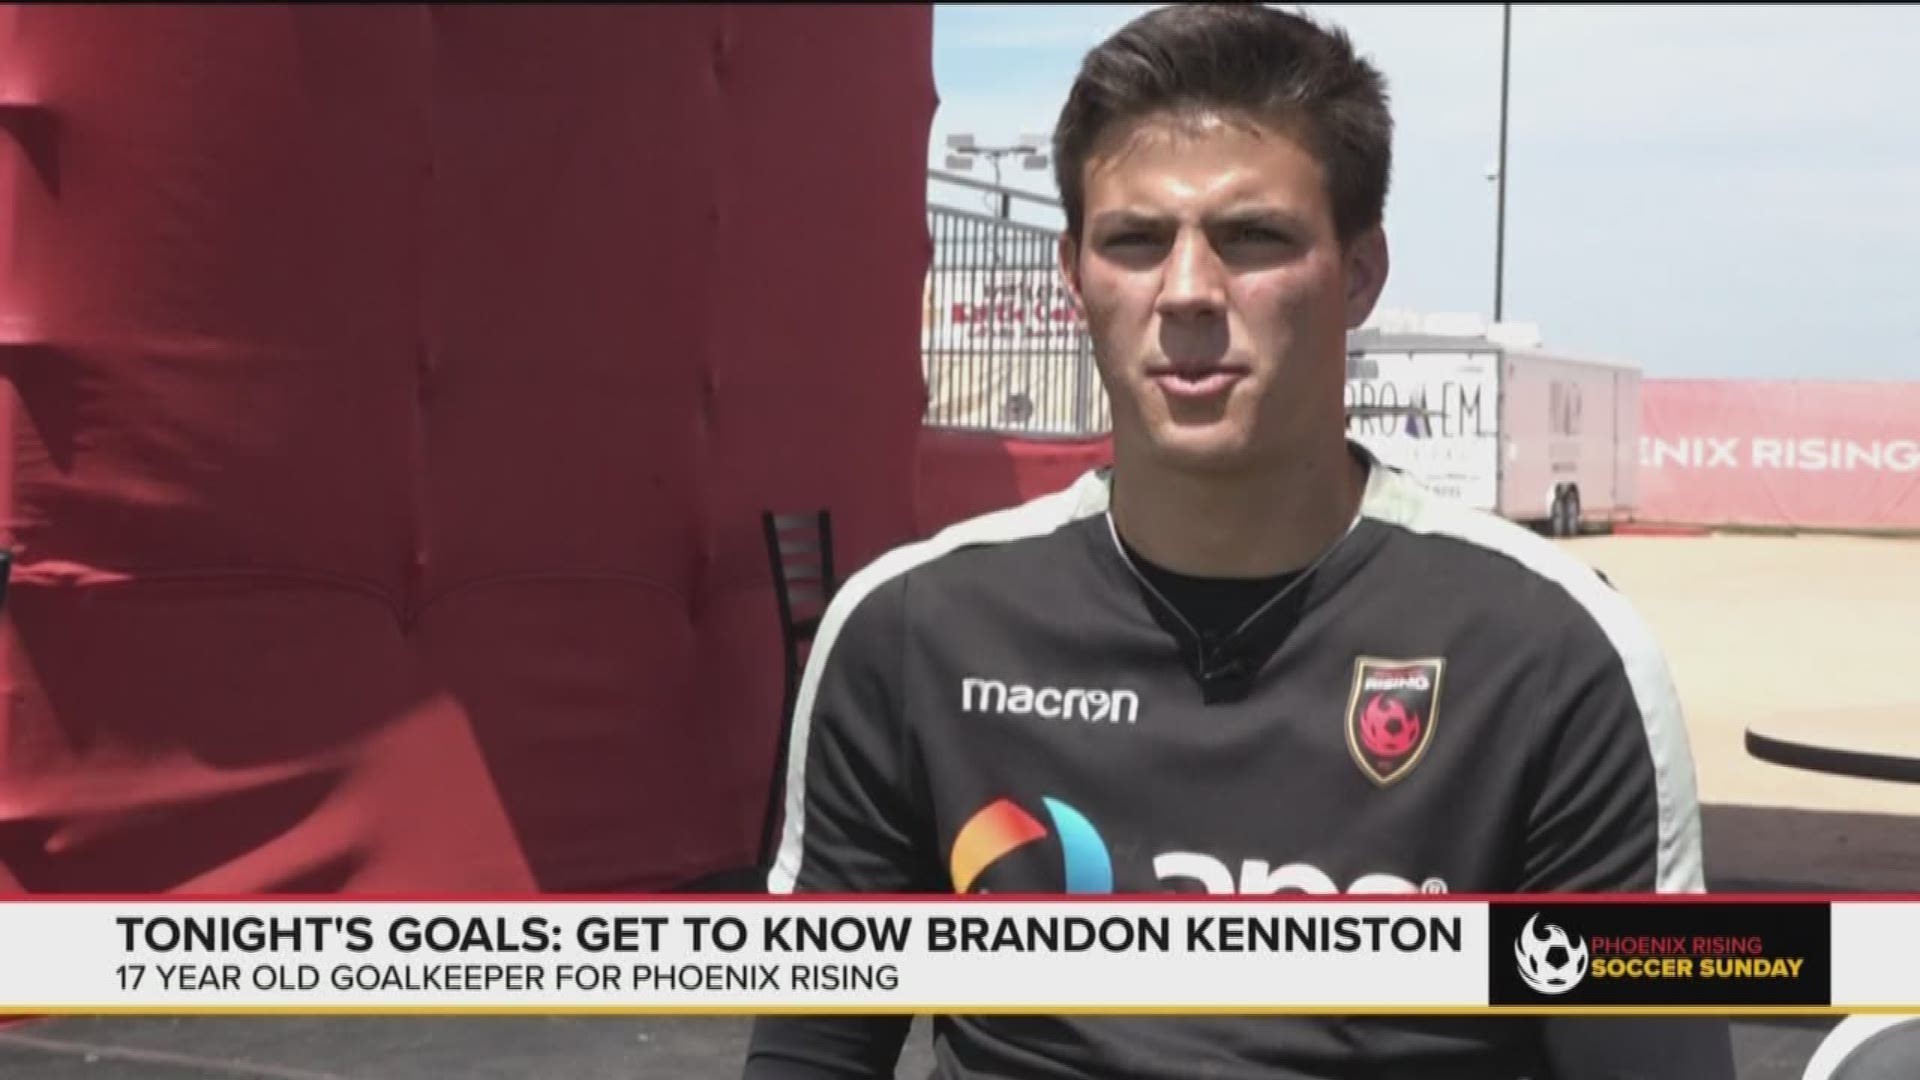 He's not even old enough to vote, but Brandon Kenniston is making a name for himself on the field. The Phoenix Rising know him as BK and now you get can get to know the team's up and coming goalkeeper. This content is sponsored by the Phoenix Rising FC.